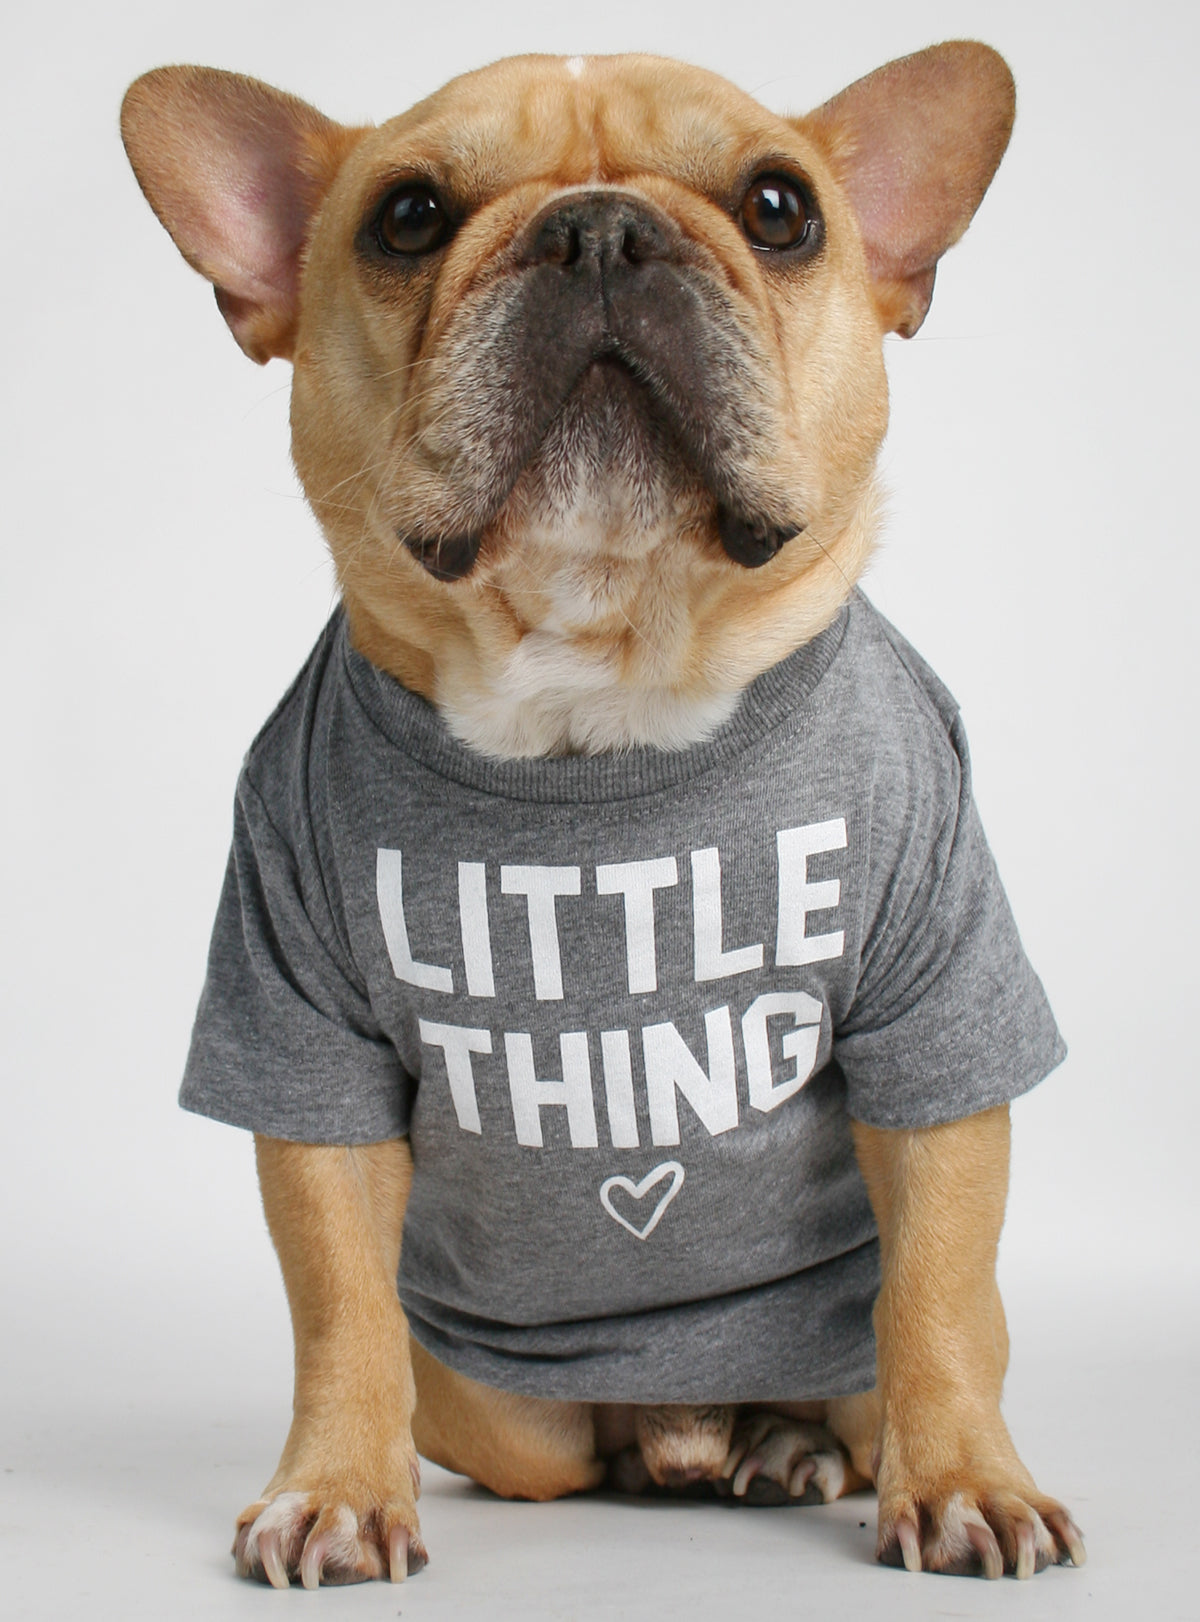 It&#39;s The Little Things In Life Matching T-Shirt Set